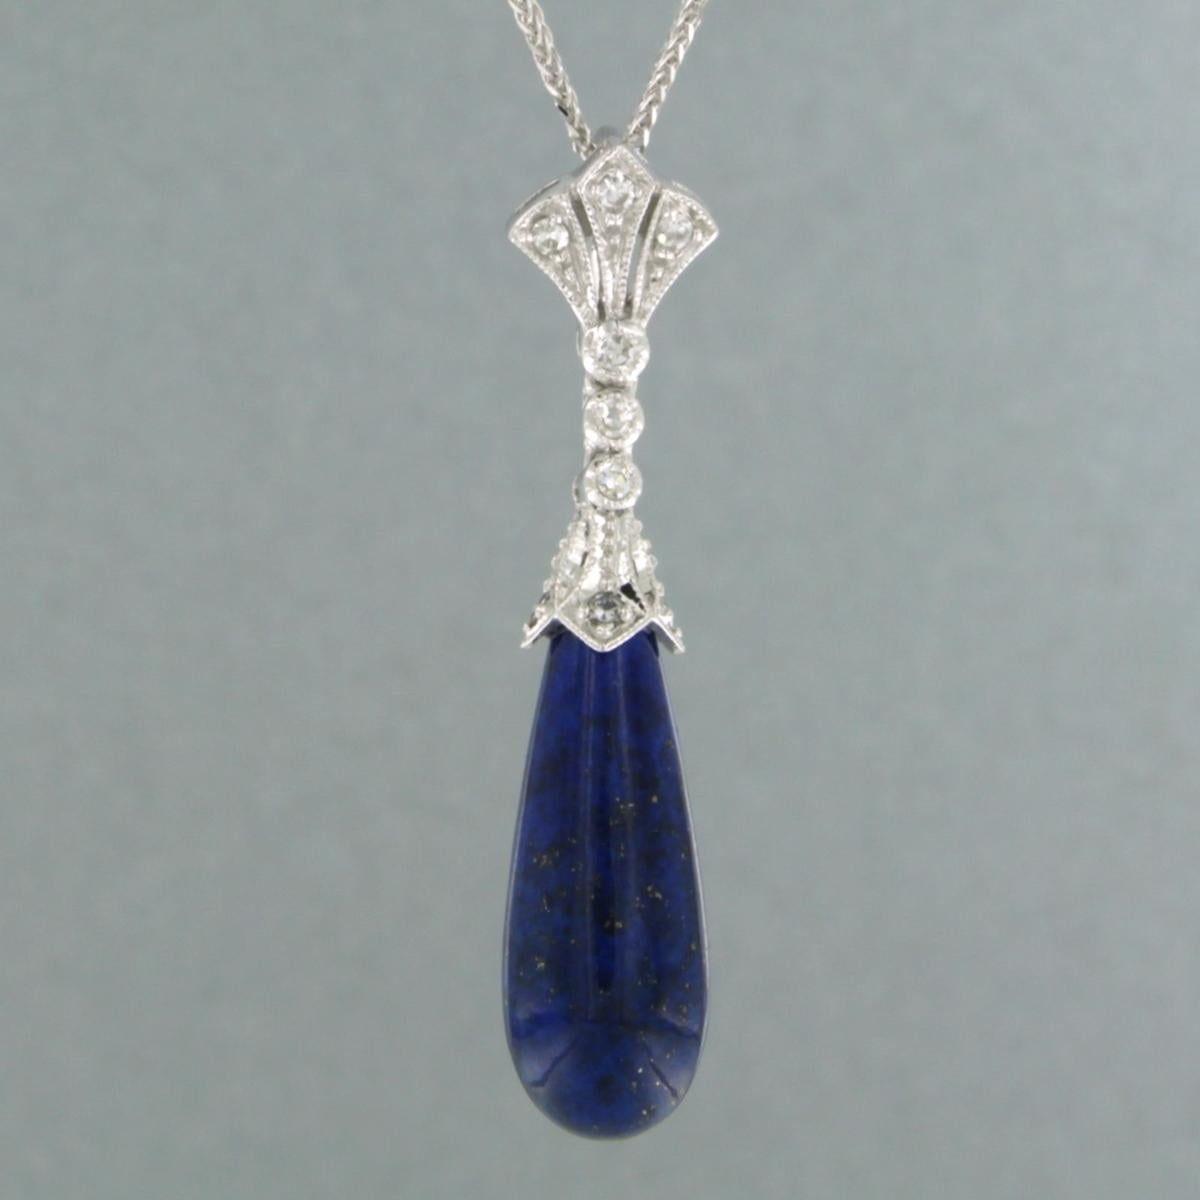 14k white gold necklace with pendant set with lapis lazuli and single cut diamonds. 0.26ct - F/G - VS/SI - 45 cm long

Detailed description

necklace is 45 cm long and 0.7 mm wide

size of the pendant is approximately 4.0 cm long by 8.3 mm